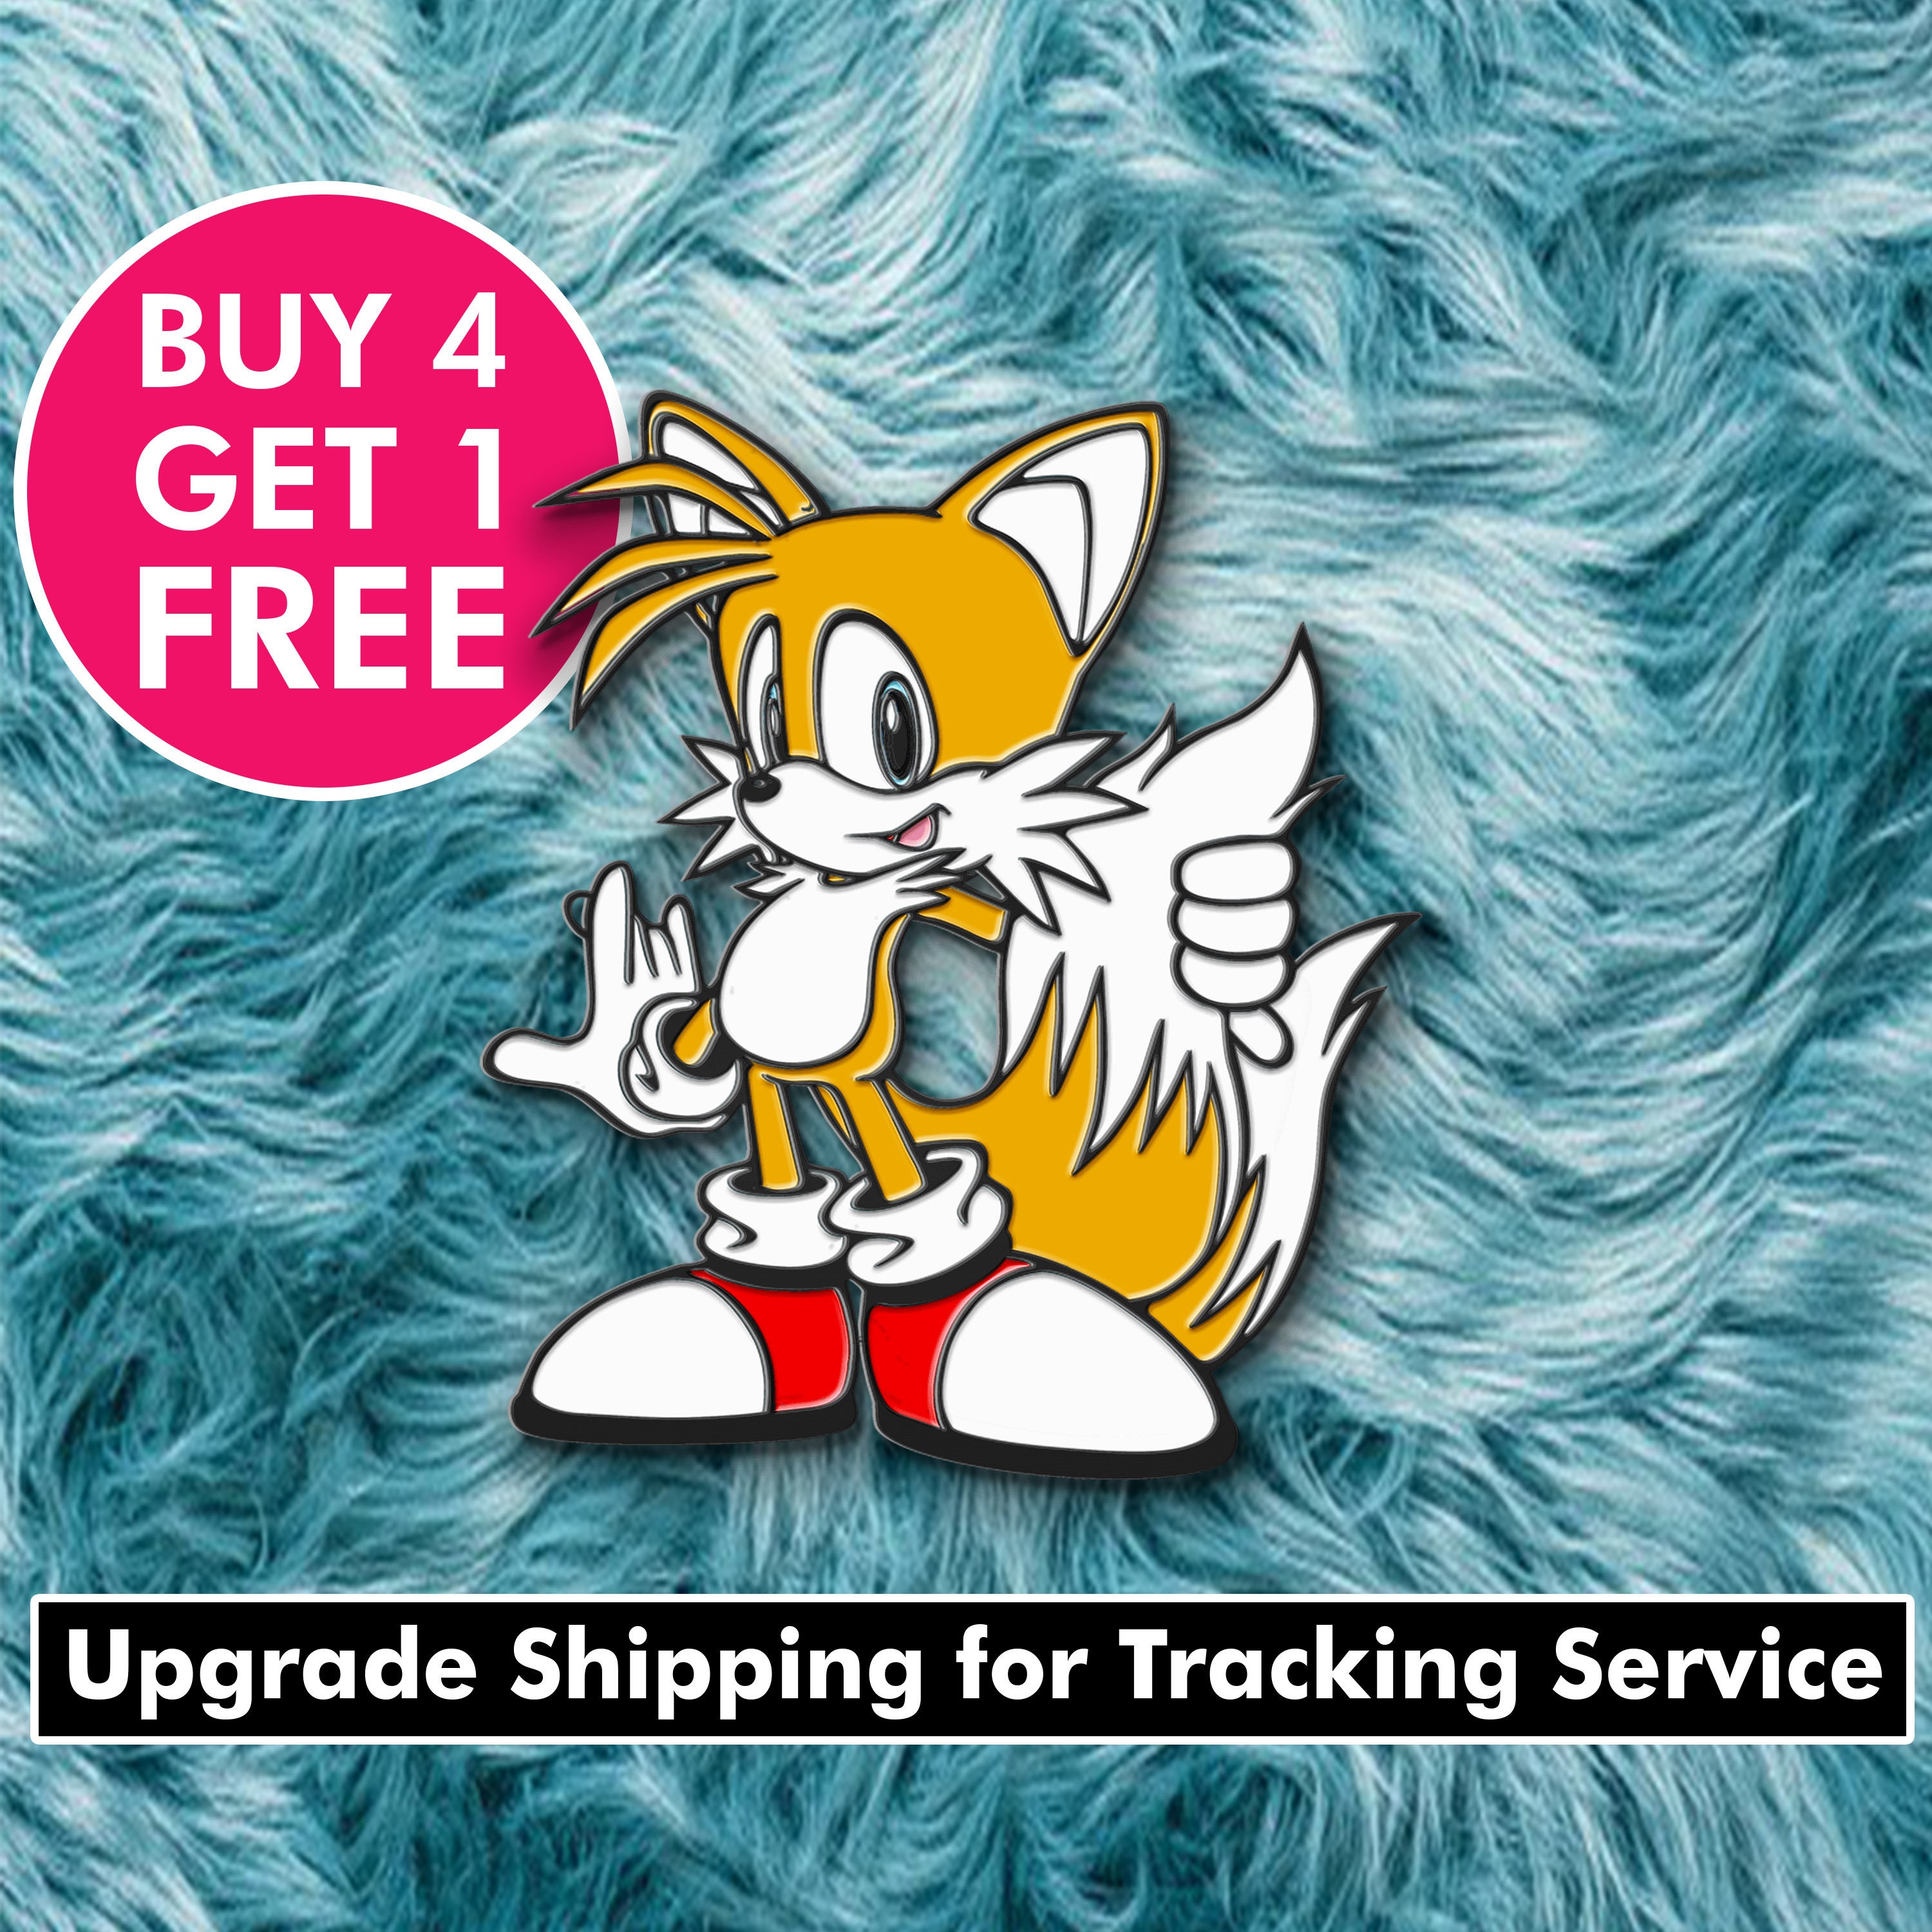 Tails The Fox Miles Tails Prower Sticker - Tails the fox Miles tails prower Classic  tails - Discover & Share GIFs